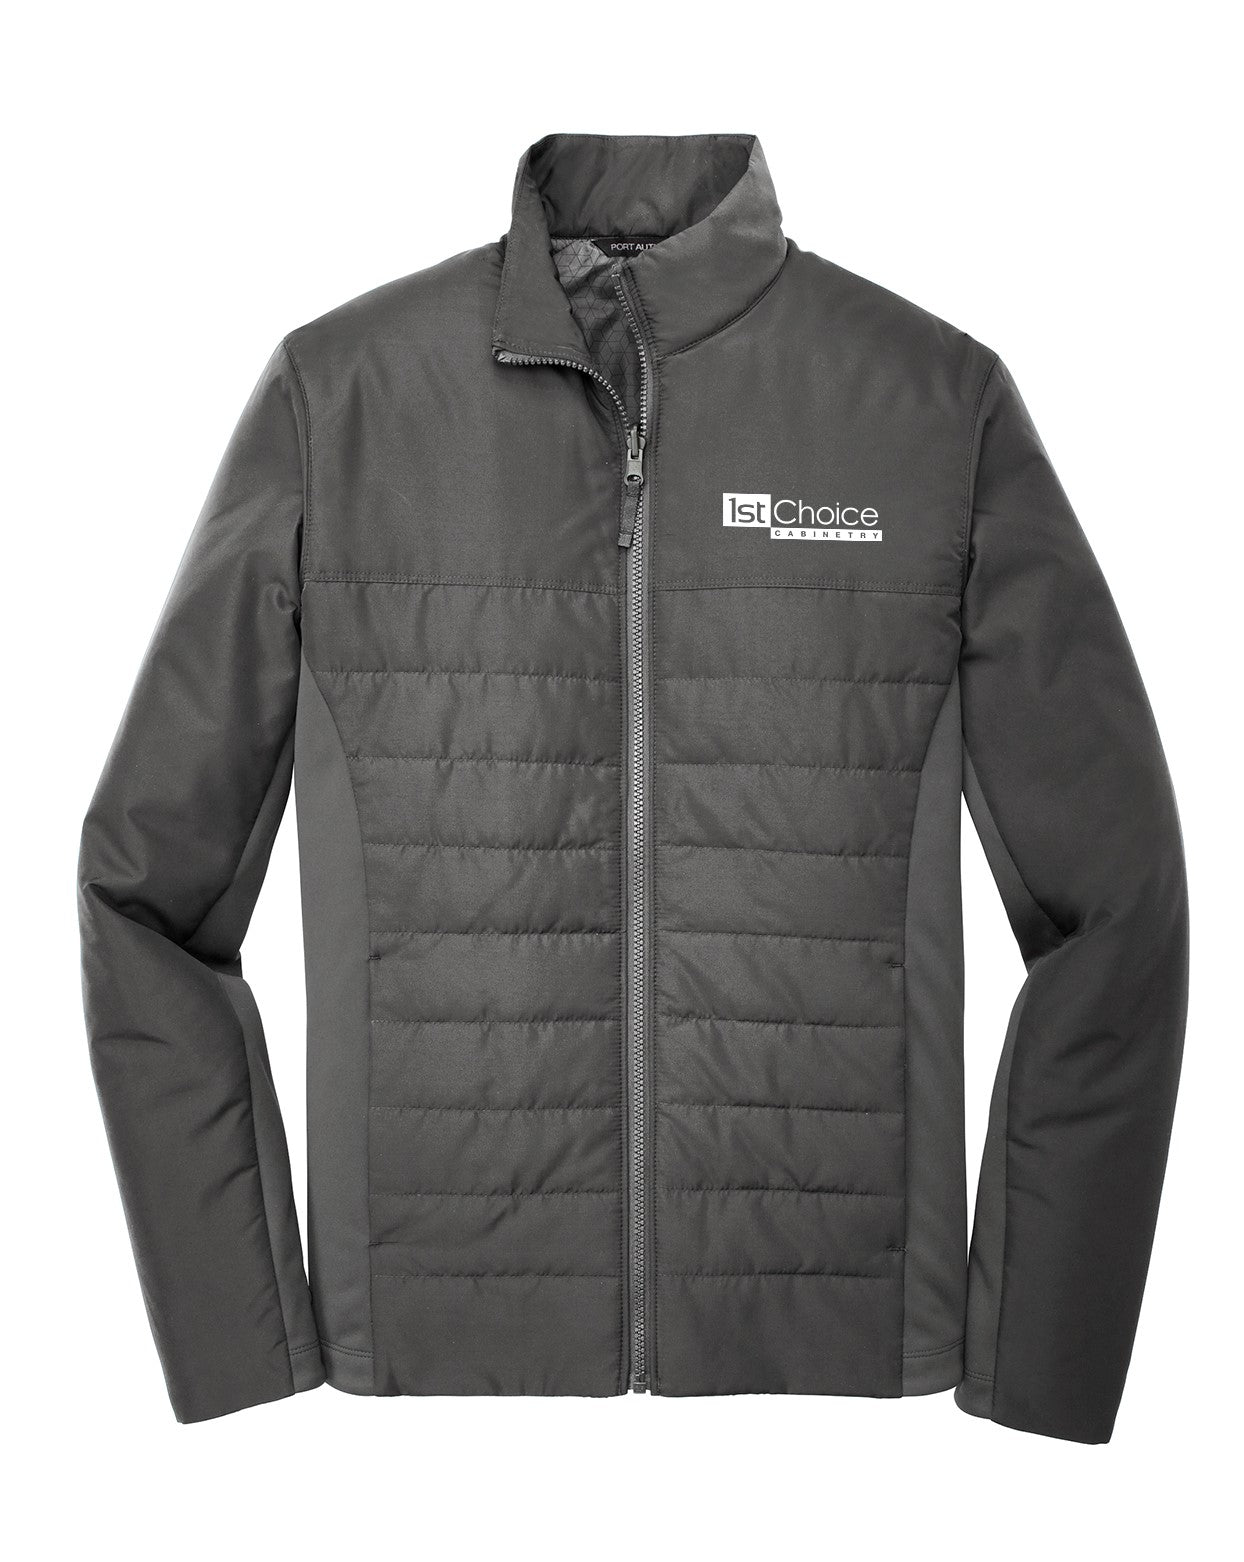 Men's Port Authority Collective Insulated Jacket